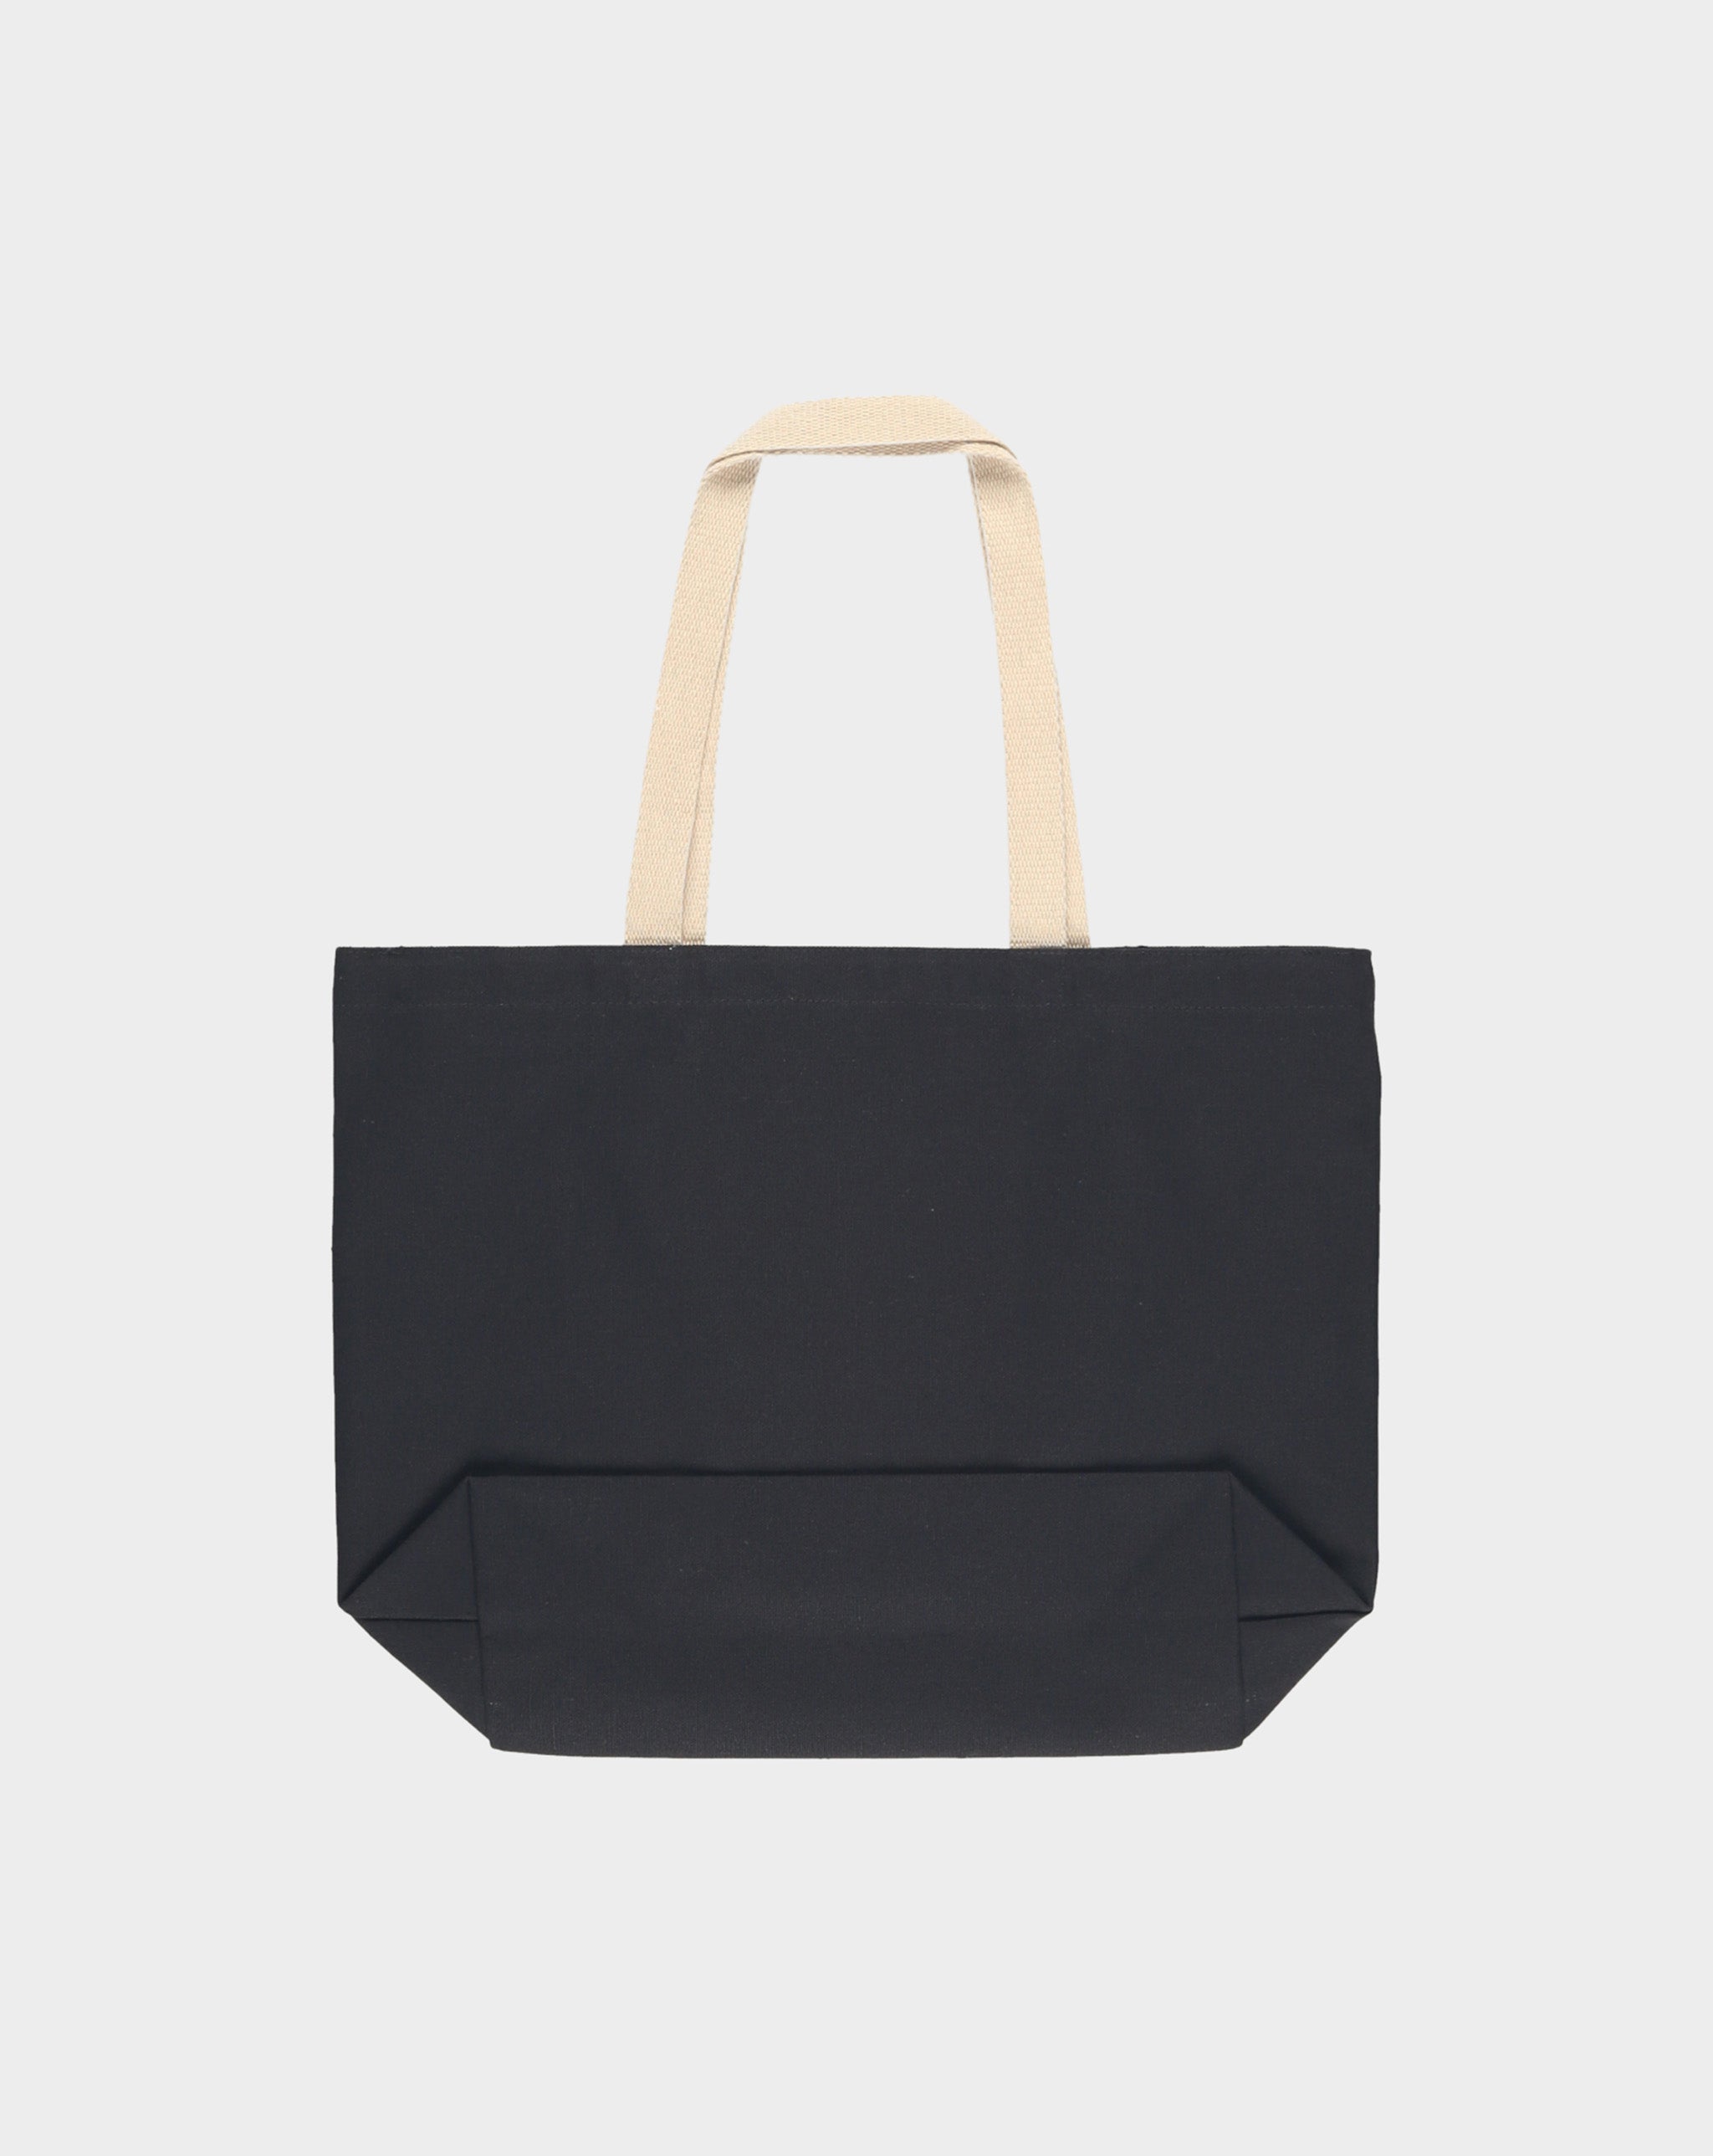 Contrast High CHxX Tote Bag  - XHIBITION